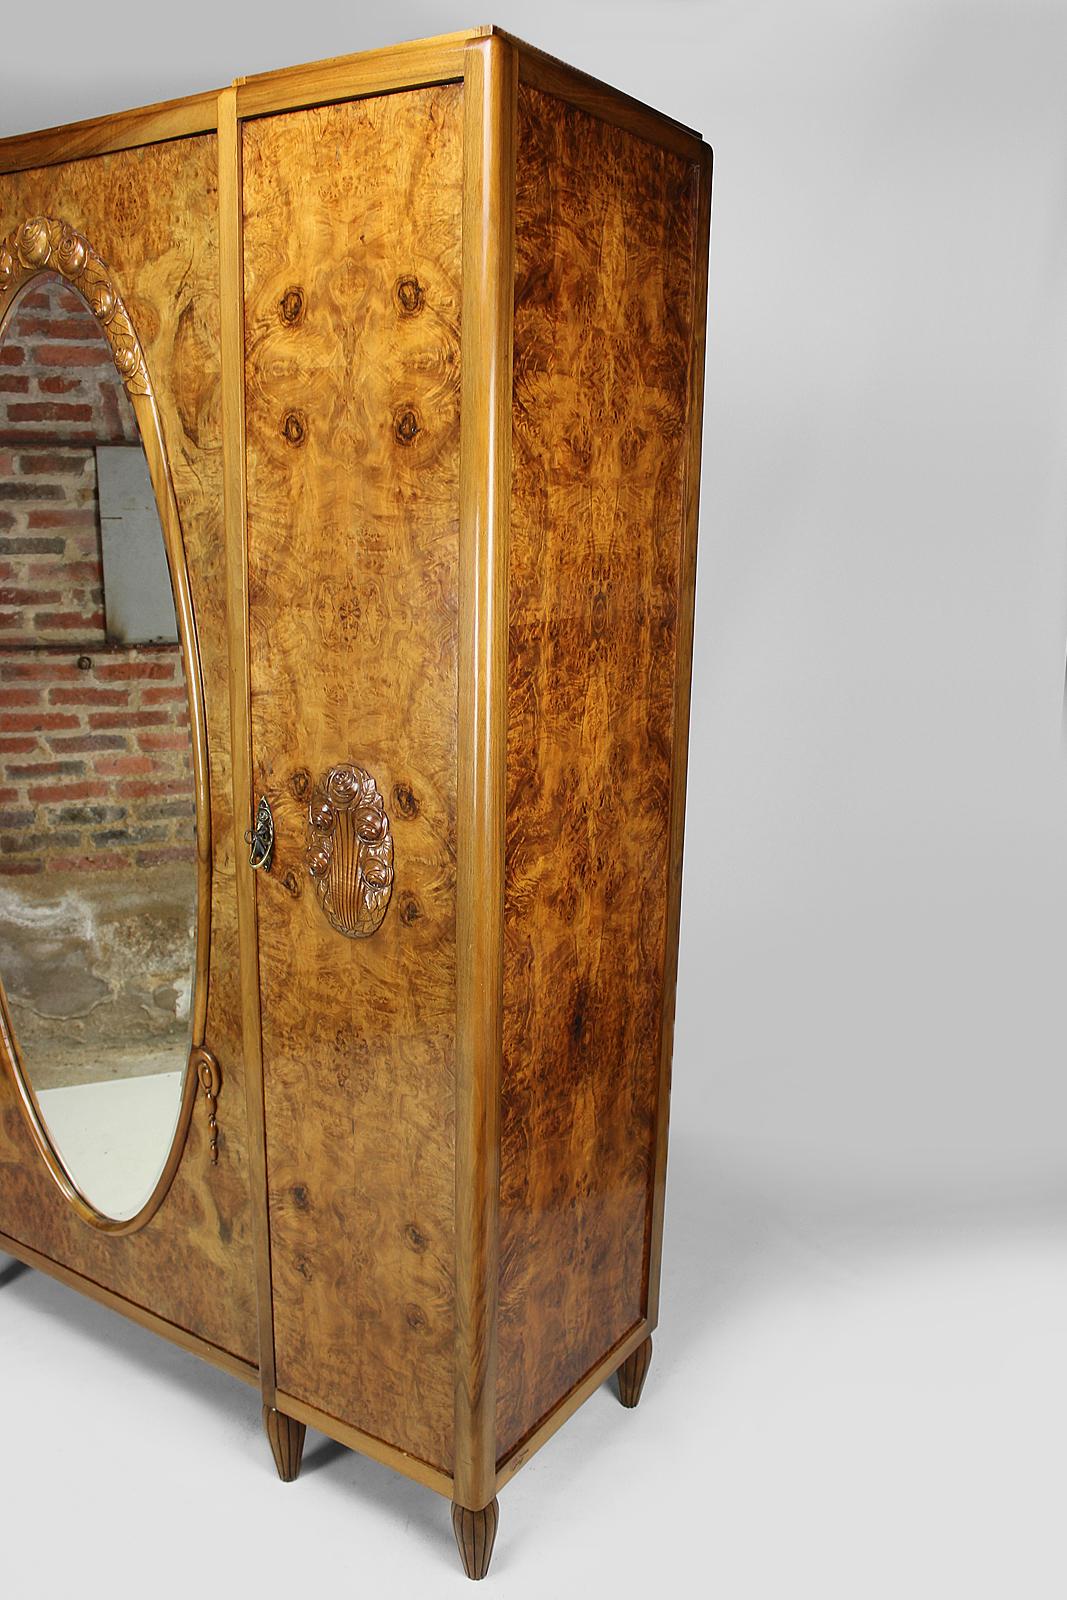 Early 20th Century Art Deco Wardrobe by Ateliers Gauthier-Poinsignon in walnut, circa 1920-1930 For Sale